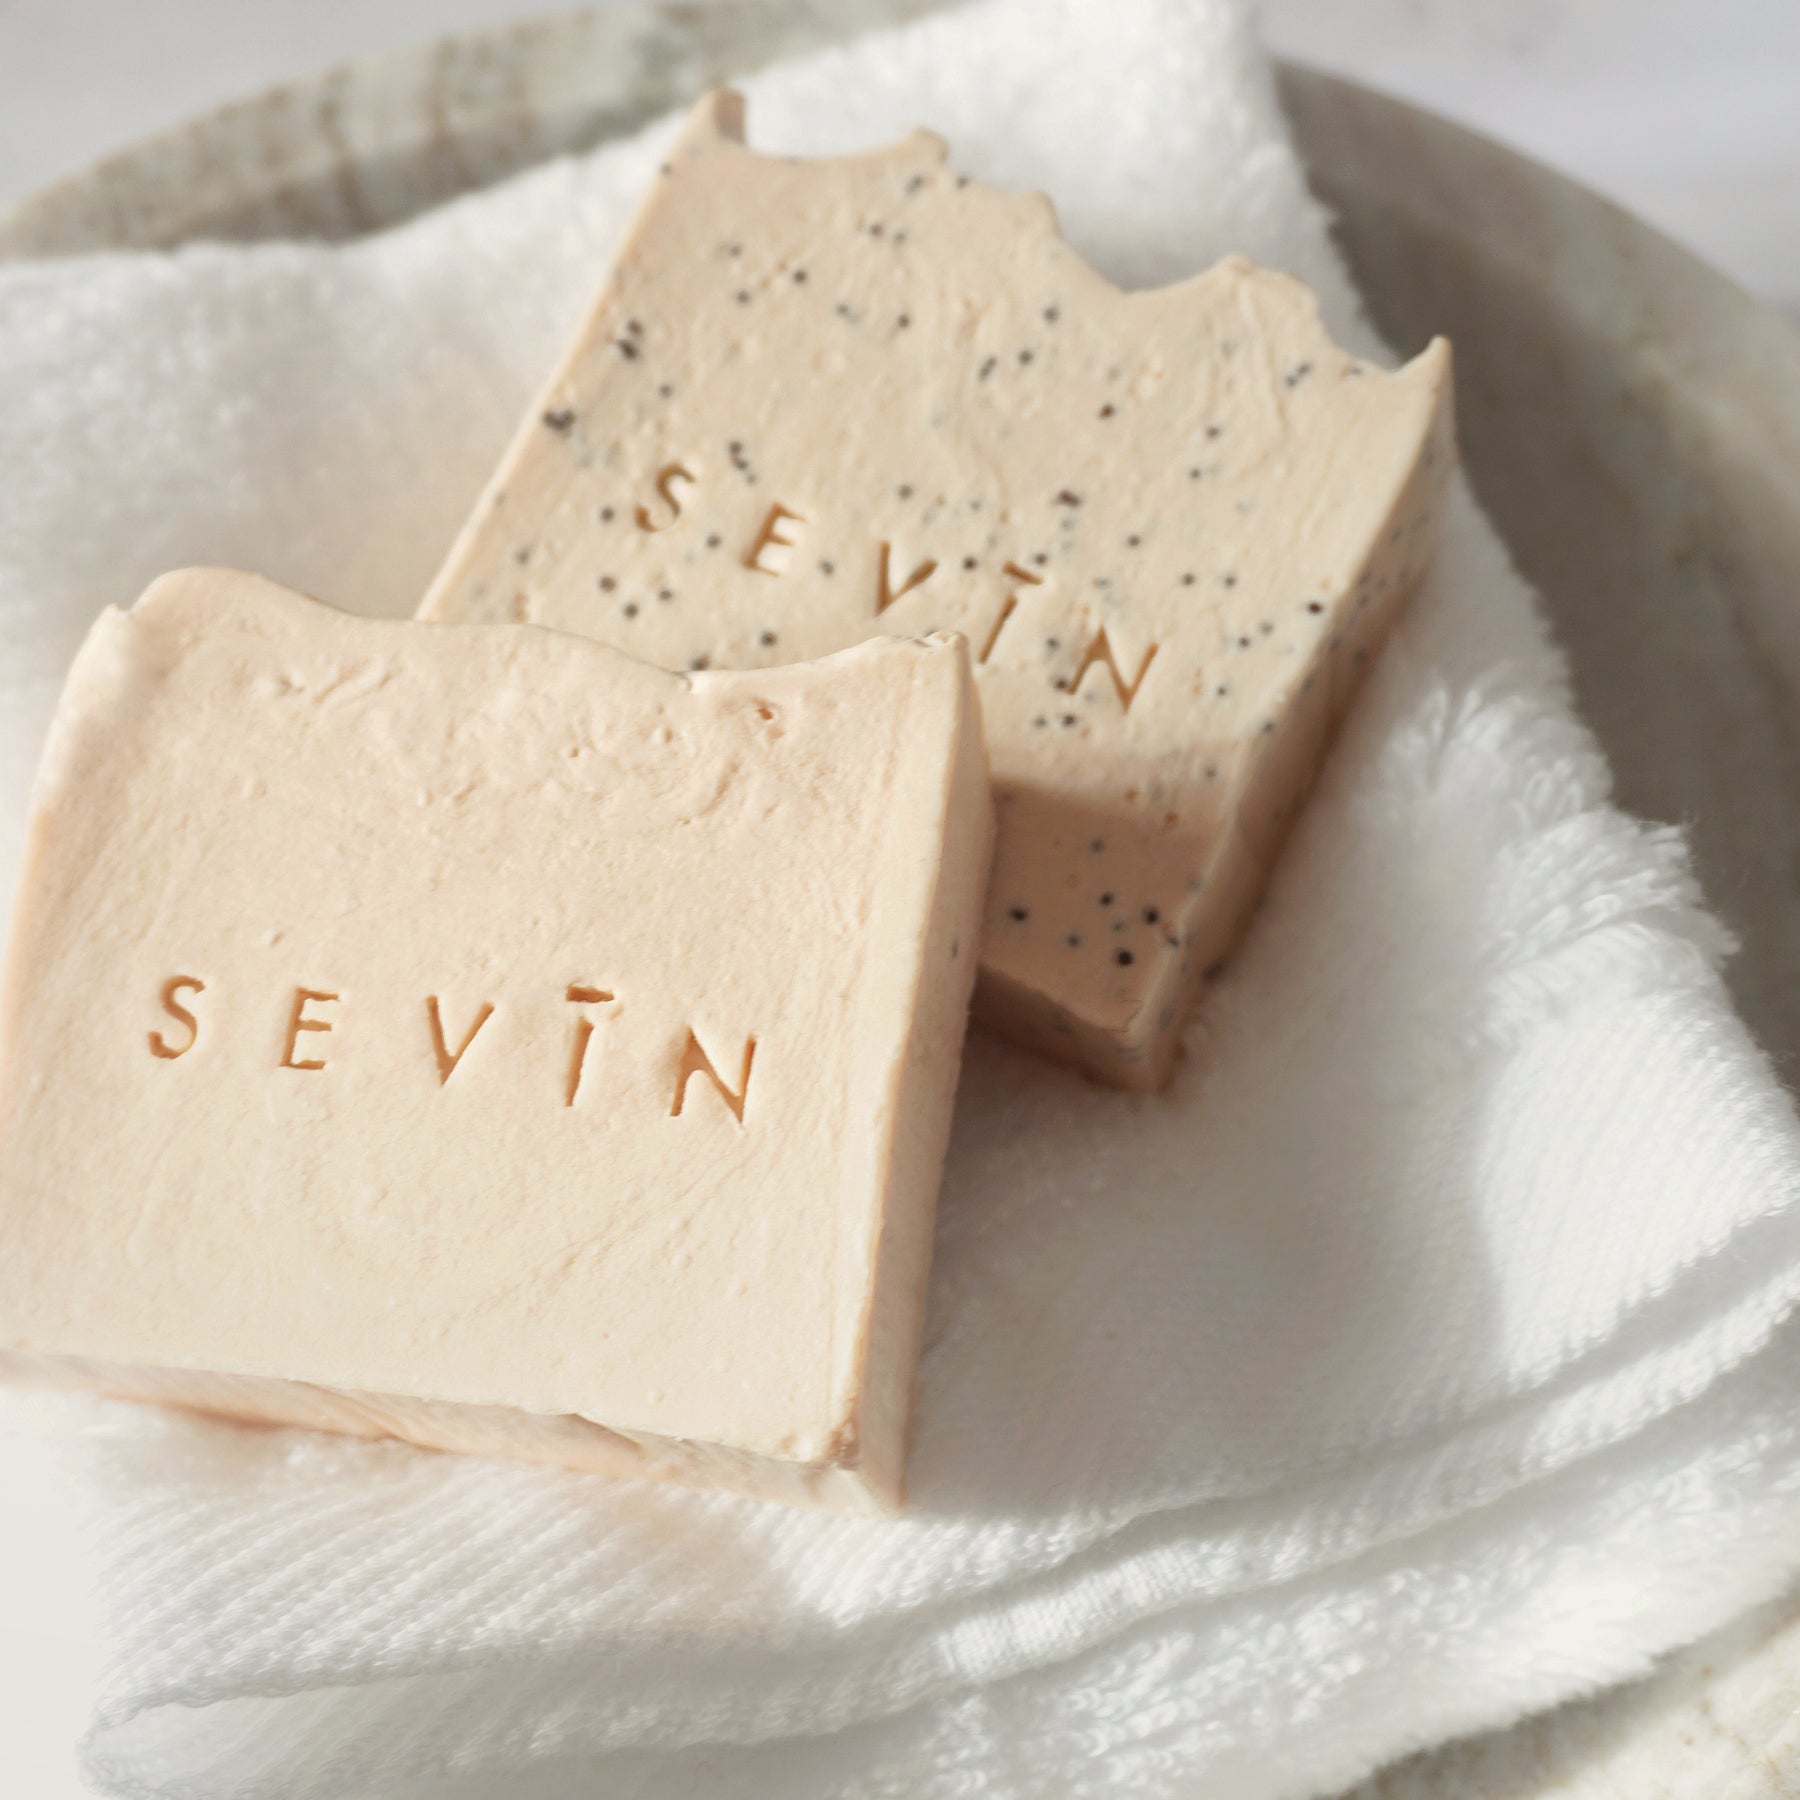 Sevin London Coral Clay Soap